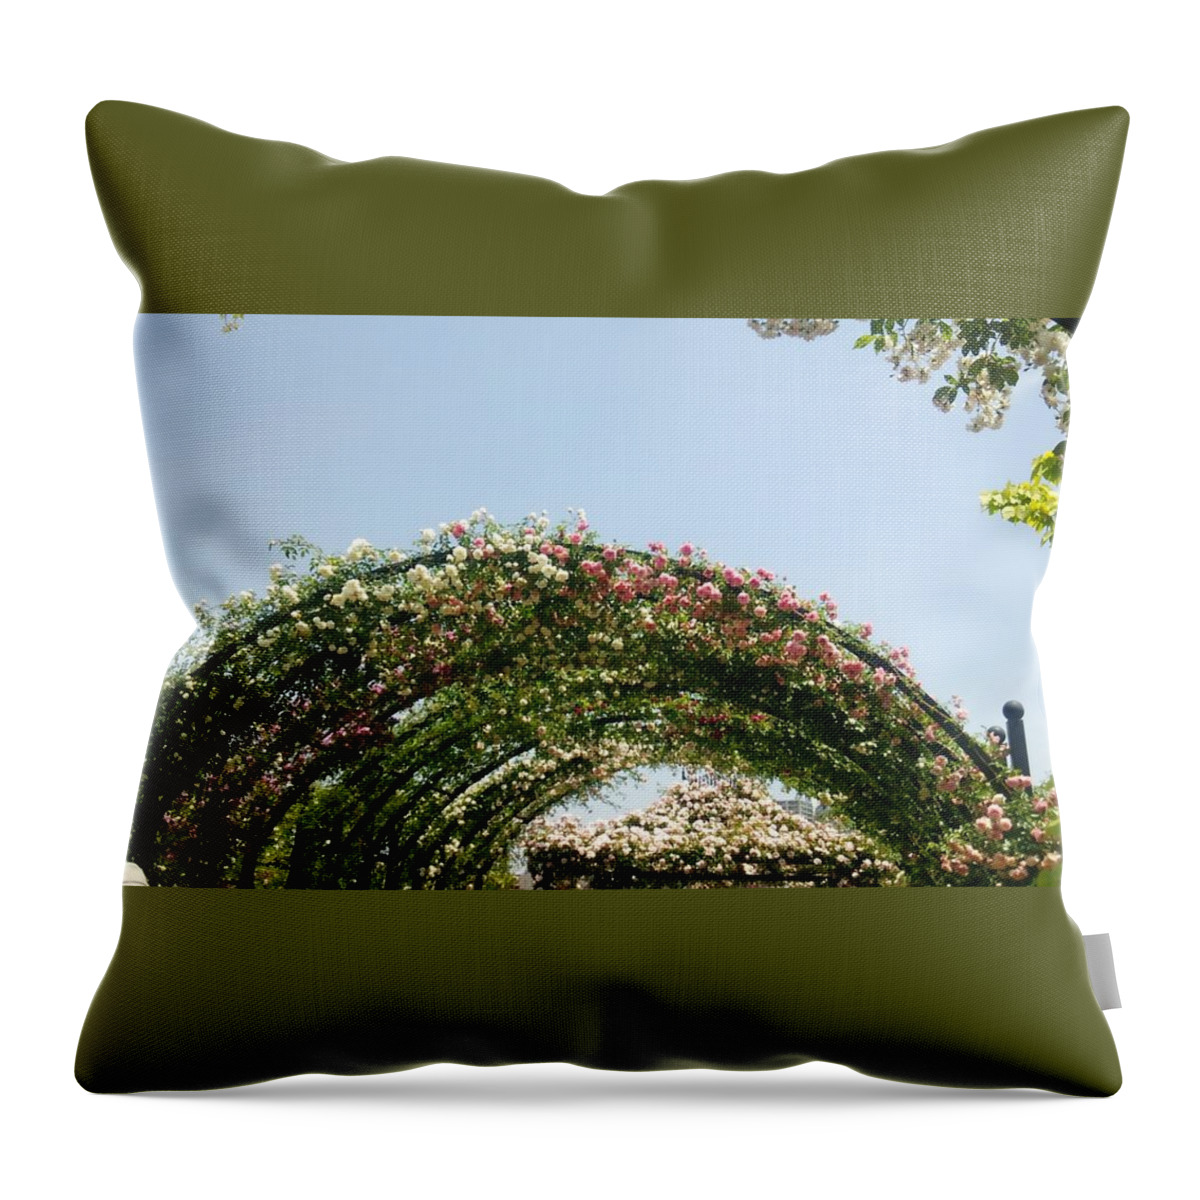 #flower#flowerloversdaily#flowerlover#green#flowerlovers#floral#rosa#pink#rose#petal#plant#blossom#photooftheday#floweroftheday#webstagram#naturestagram#flowerstagram#naturelover#naturelovers#naturehippys#naturehippy#flowers#yokohama#japan#kn#΂#o##l#{ Throw Pillow featuring the photograph Rose #30 by Tomoko Takigawa